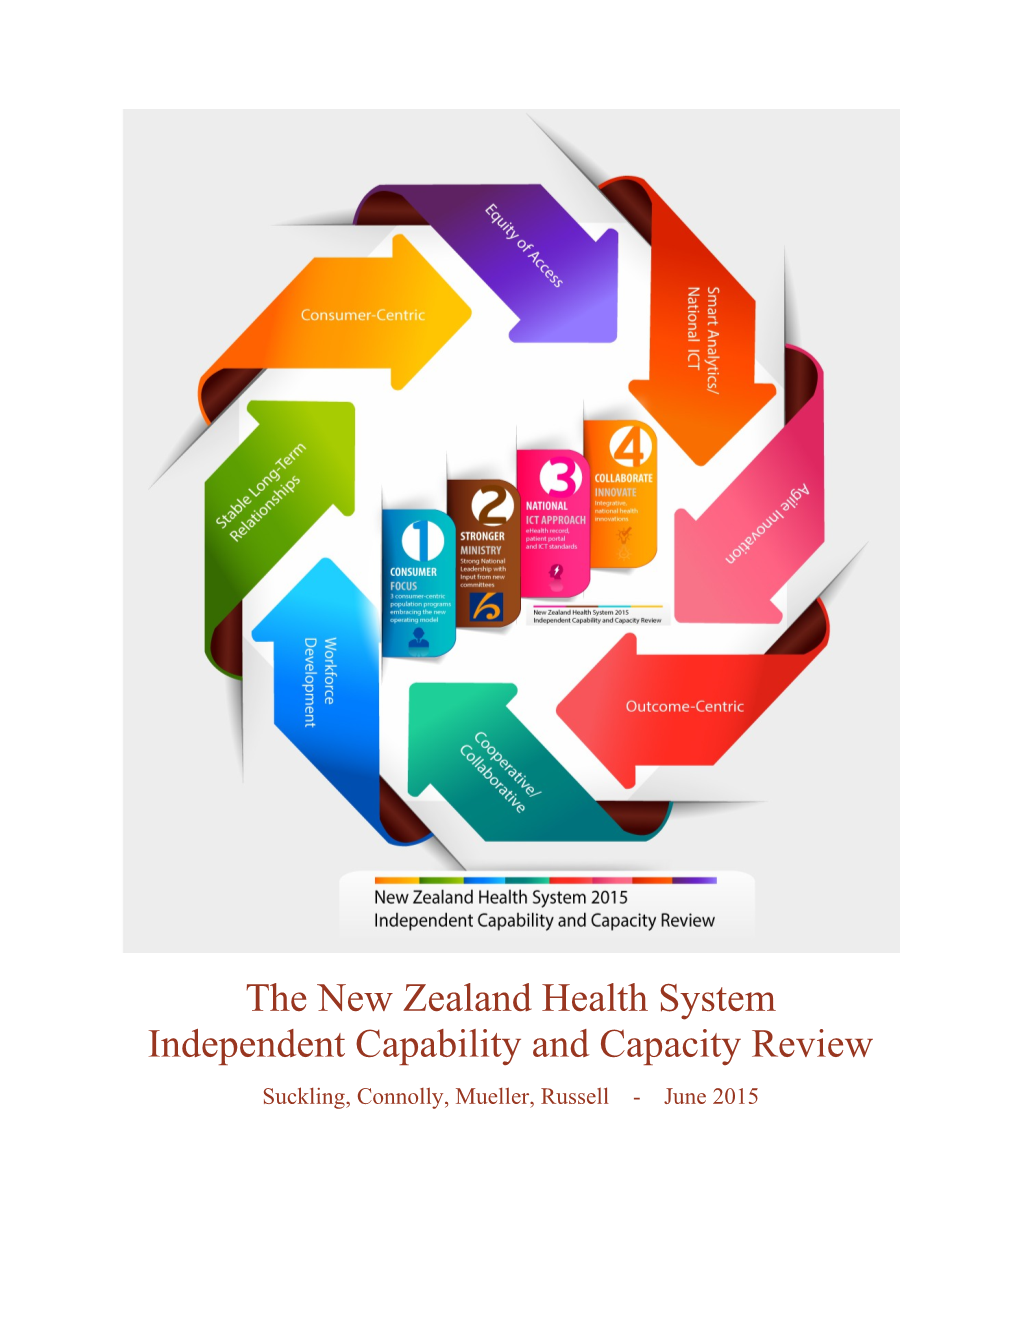 The New Zealand Health System Independent Capability And Capacity Review